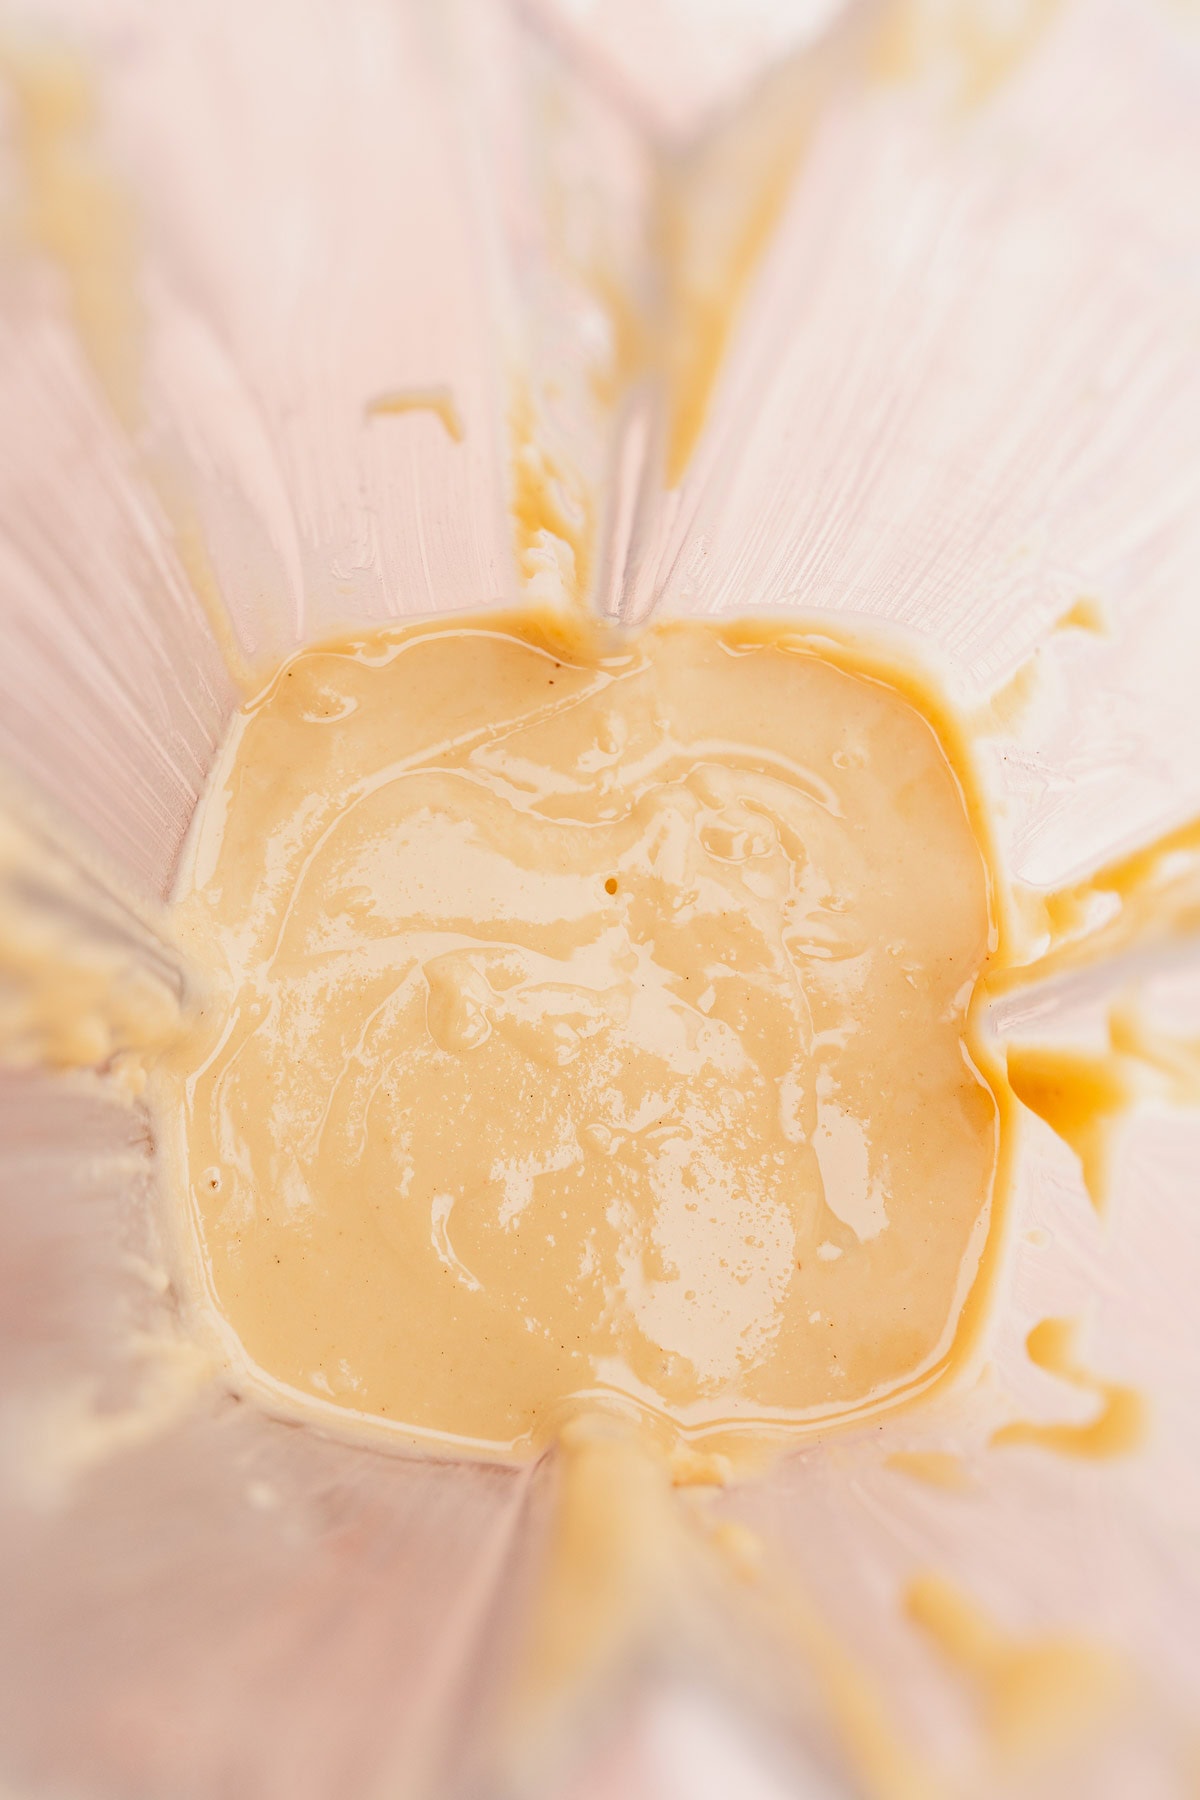 Close-up image of creamy macadamia nut butter in a jar with residue on the sides.